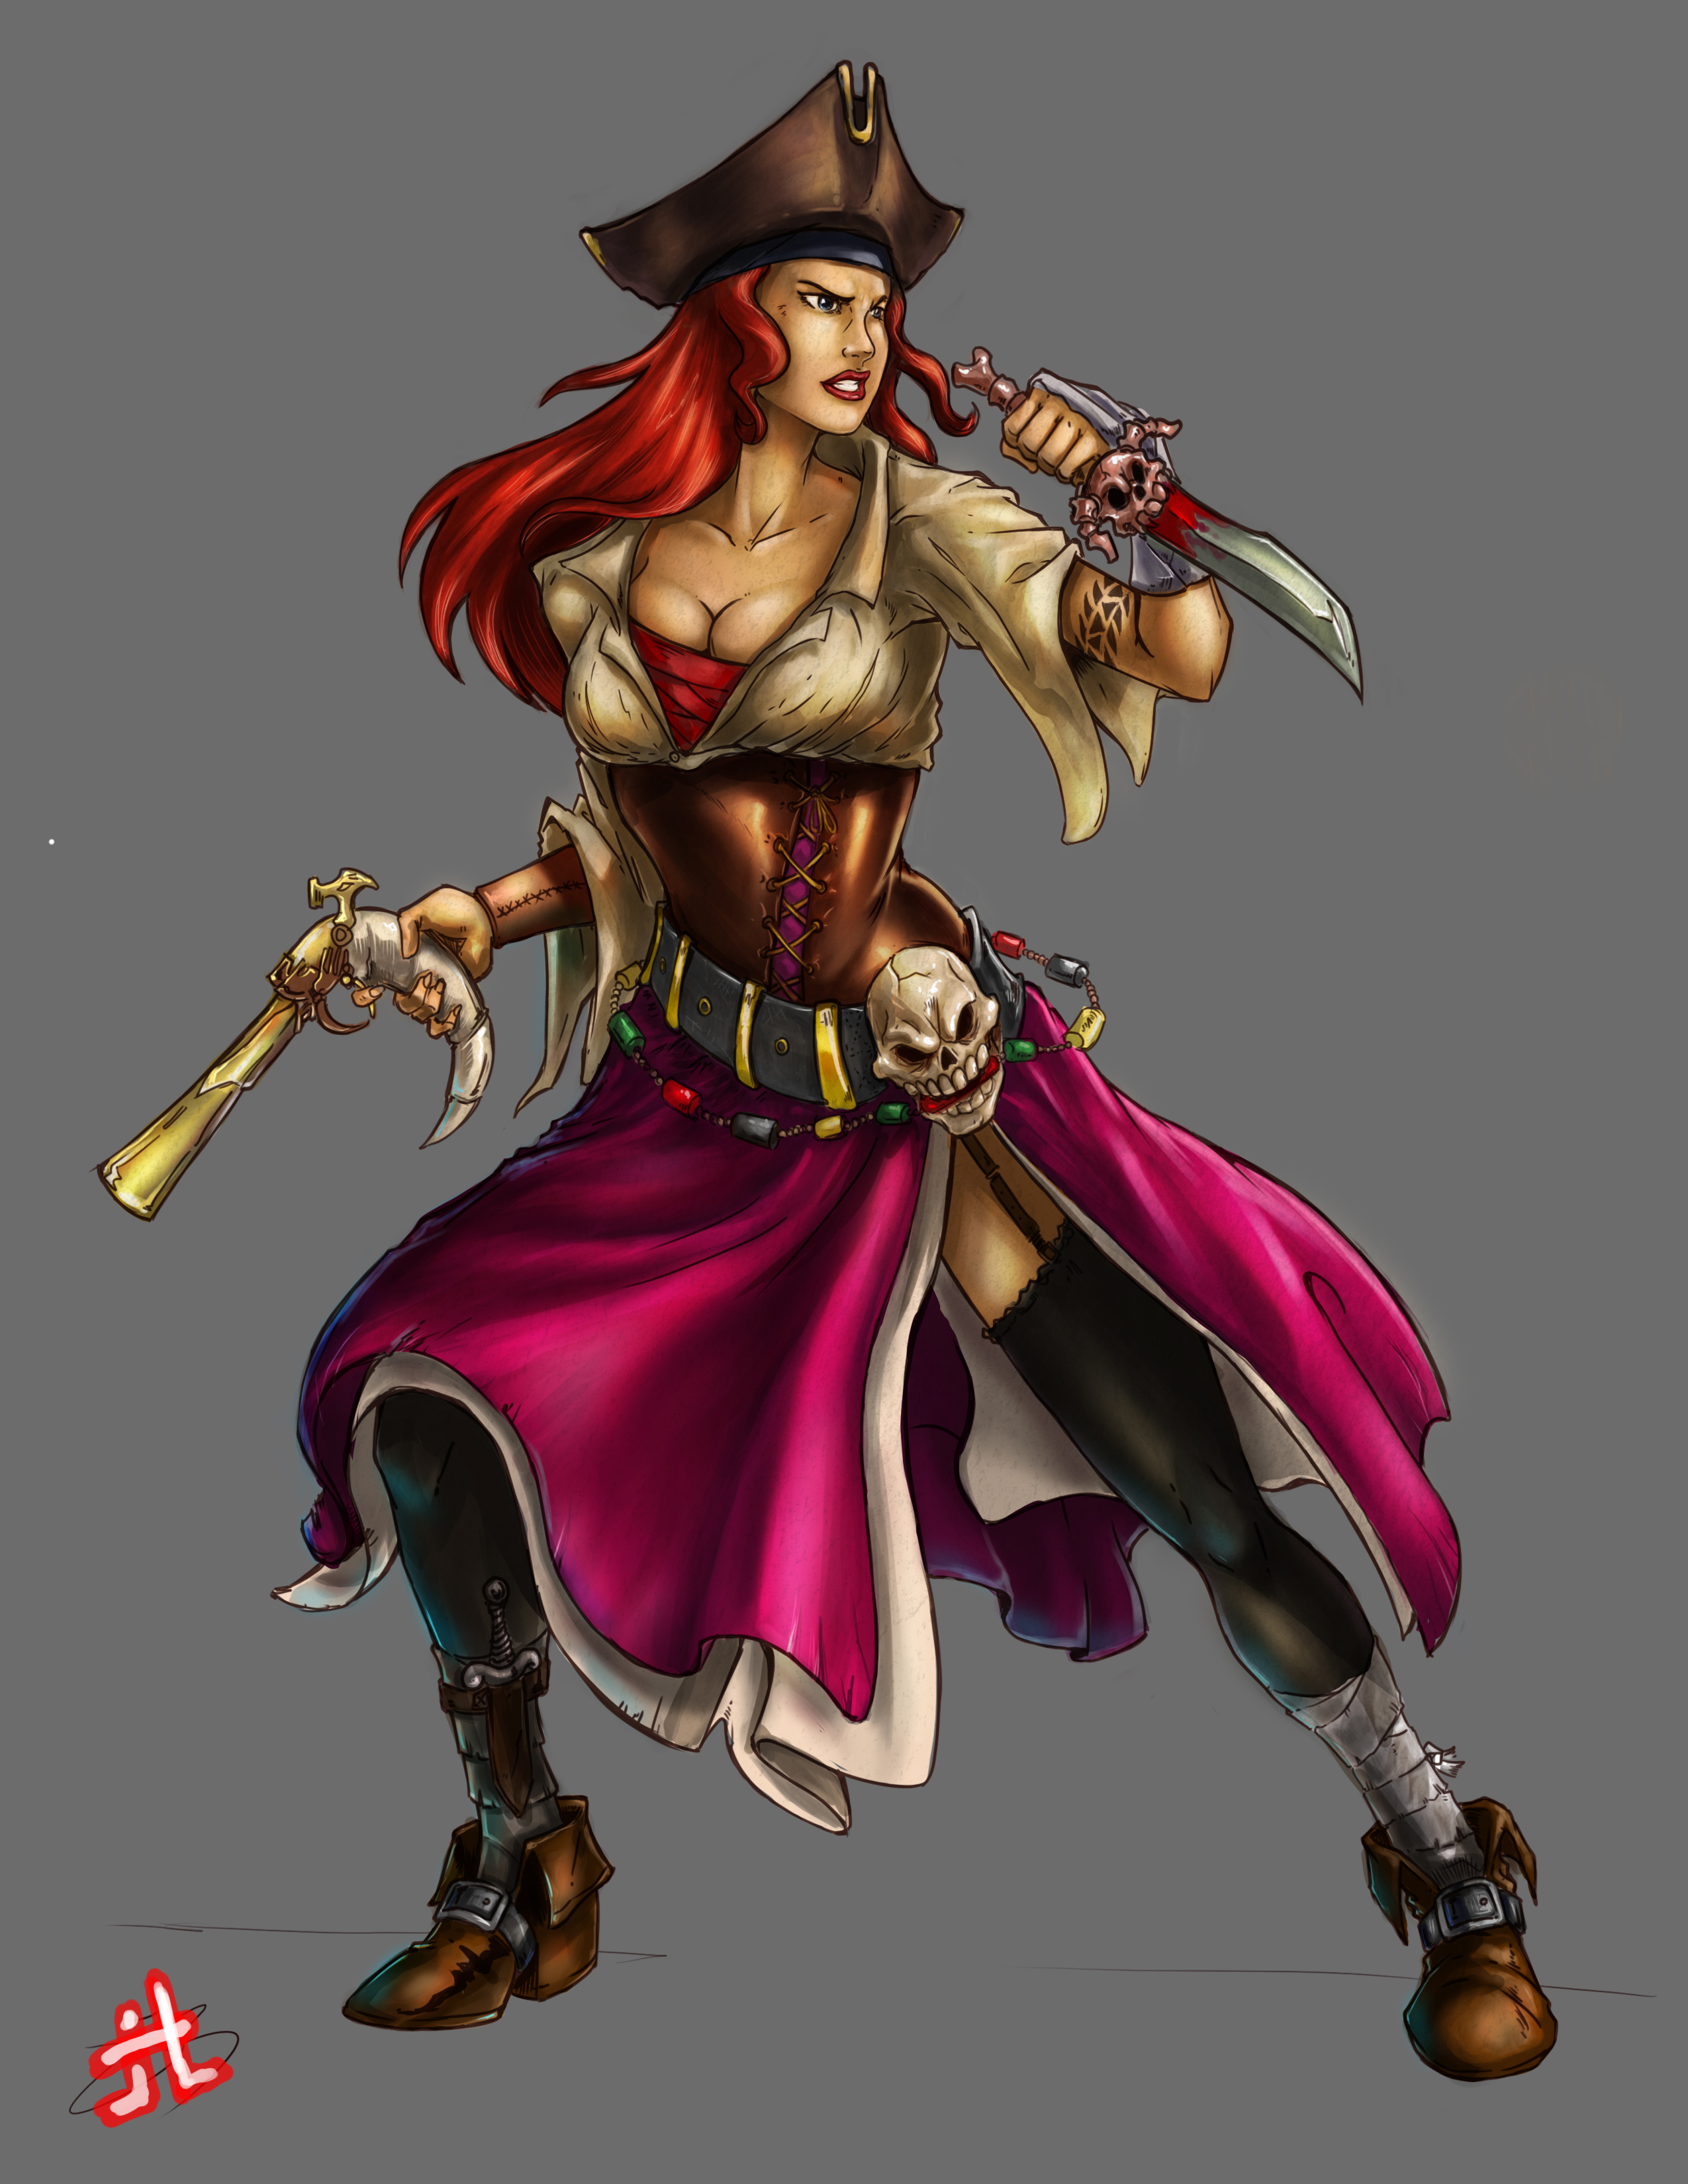 Pirate Girl - Colors